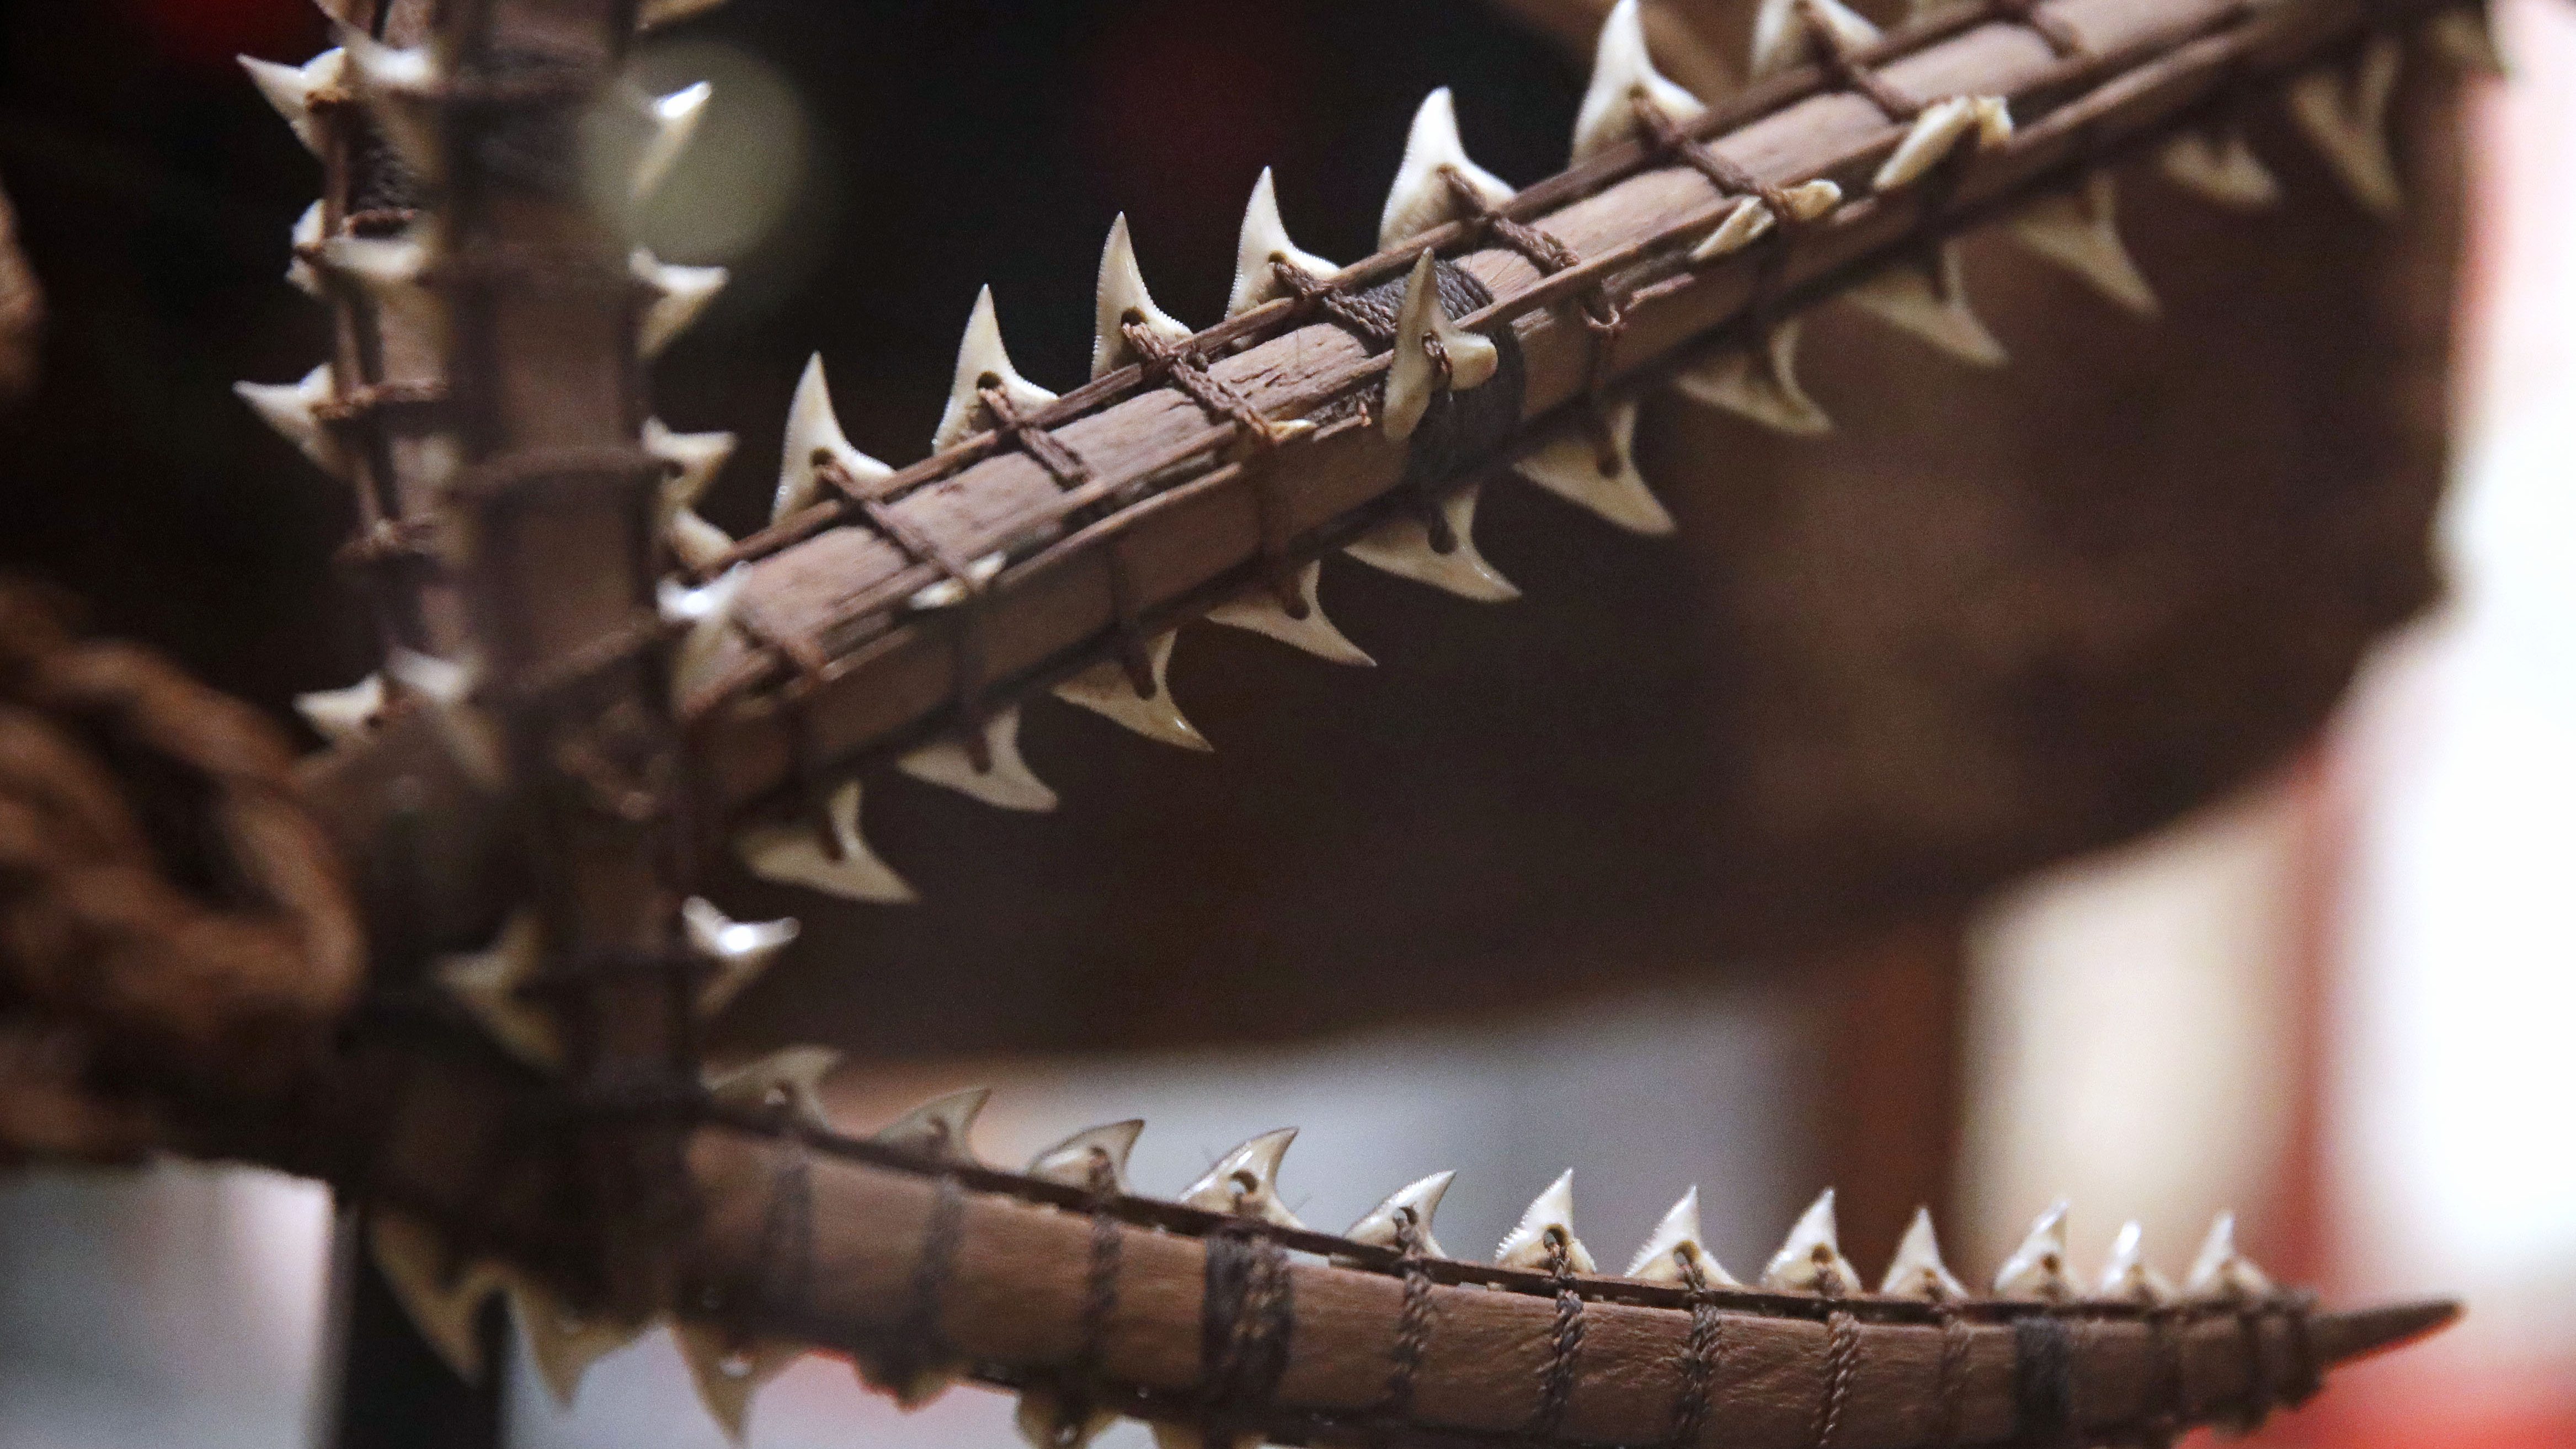 Detail of an ancient shark tooth sword from the South Pacific are displayed as part of the Arts of War exhibit at the Peabody Museum of Archaeology & Ethnology at Harvard University in Cambridge, Mass., Thursday, Oct. 13, 2016. The Peabody, one of the oldest and largest museums in the world focused on the study of societies and cultures, turns 150 years old this month. (AP Photo/Charles Krupa)